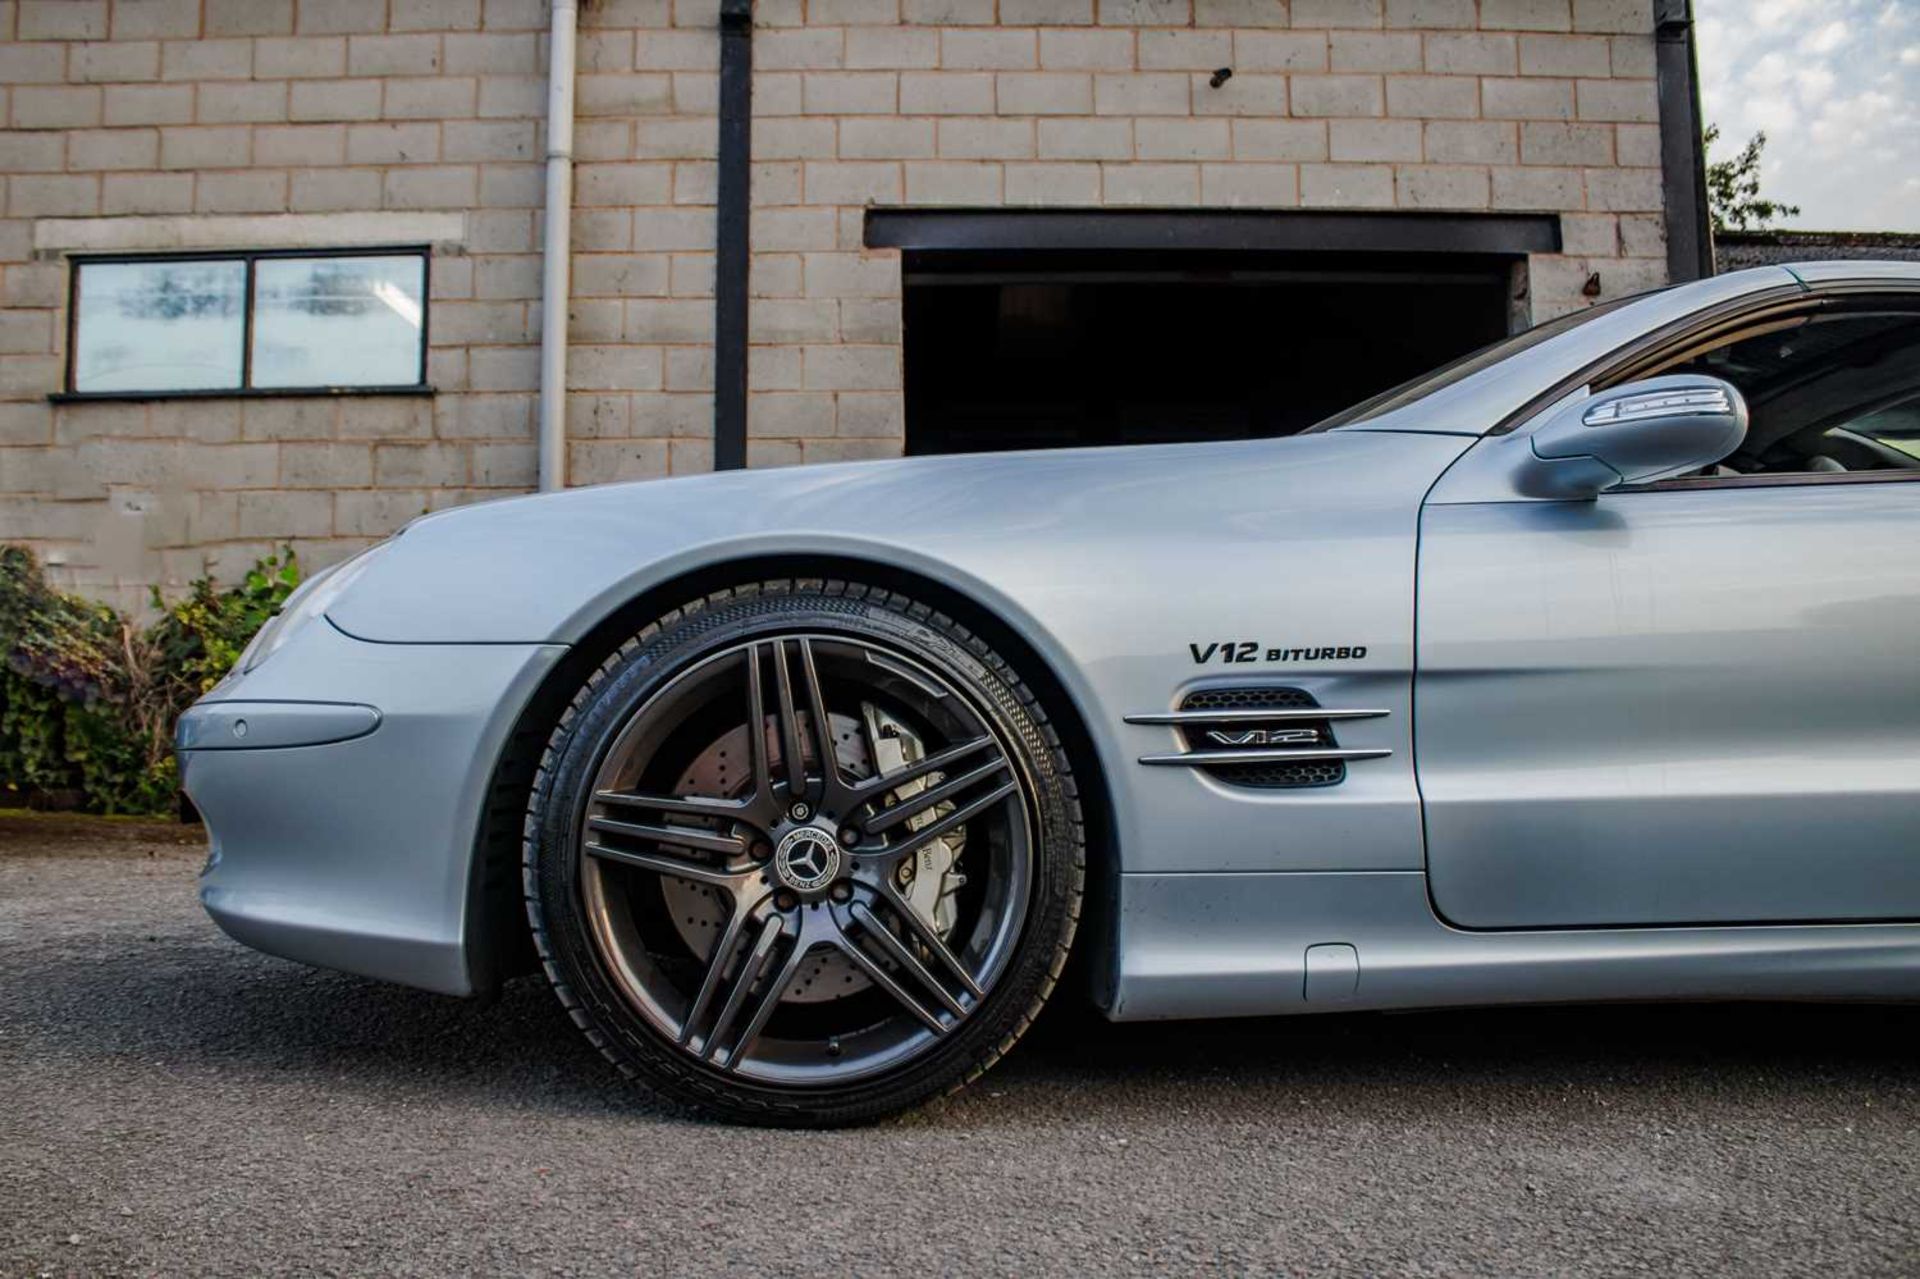 2004 Mercedes SL600 Flagship, 493bhp twin-turbo powered model  - Image 9 of 42